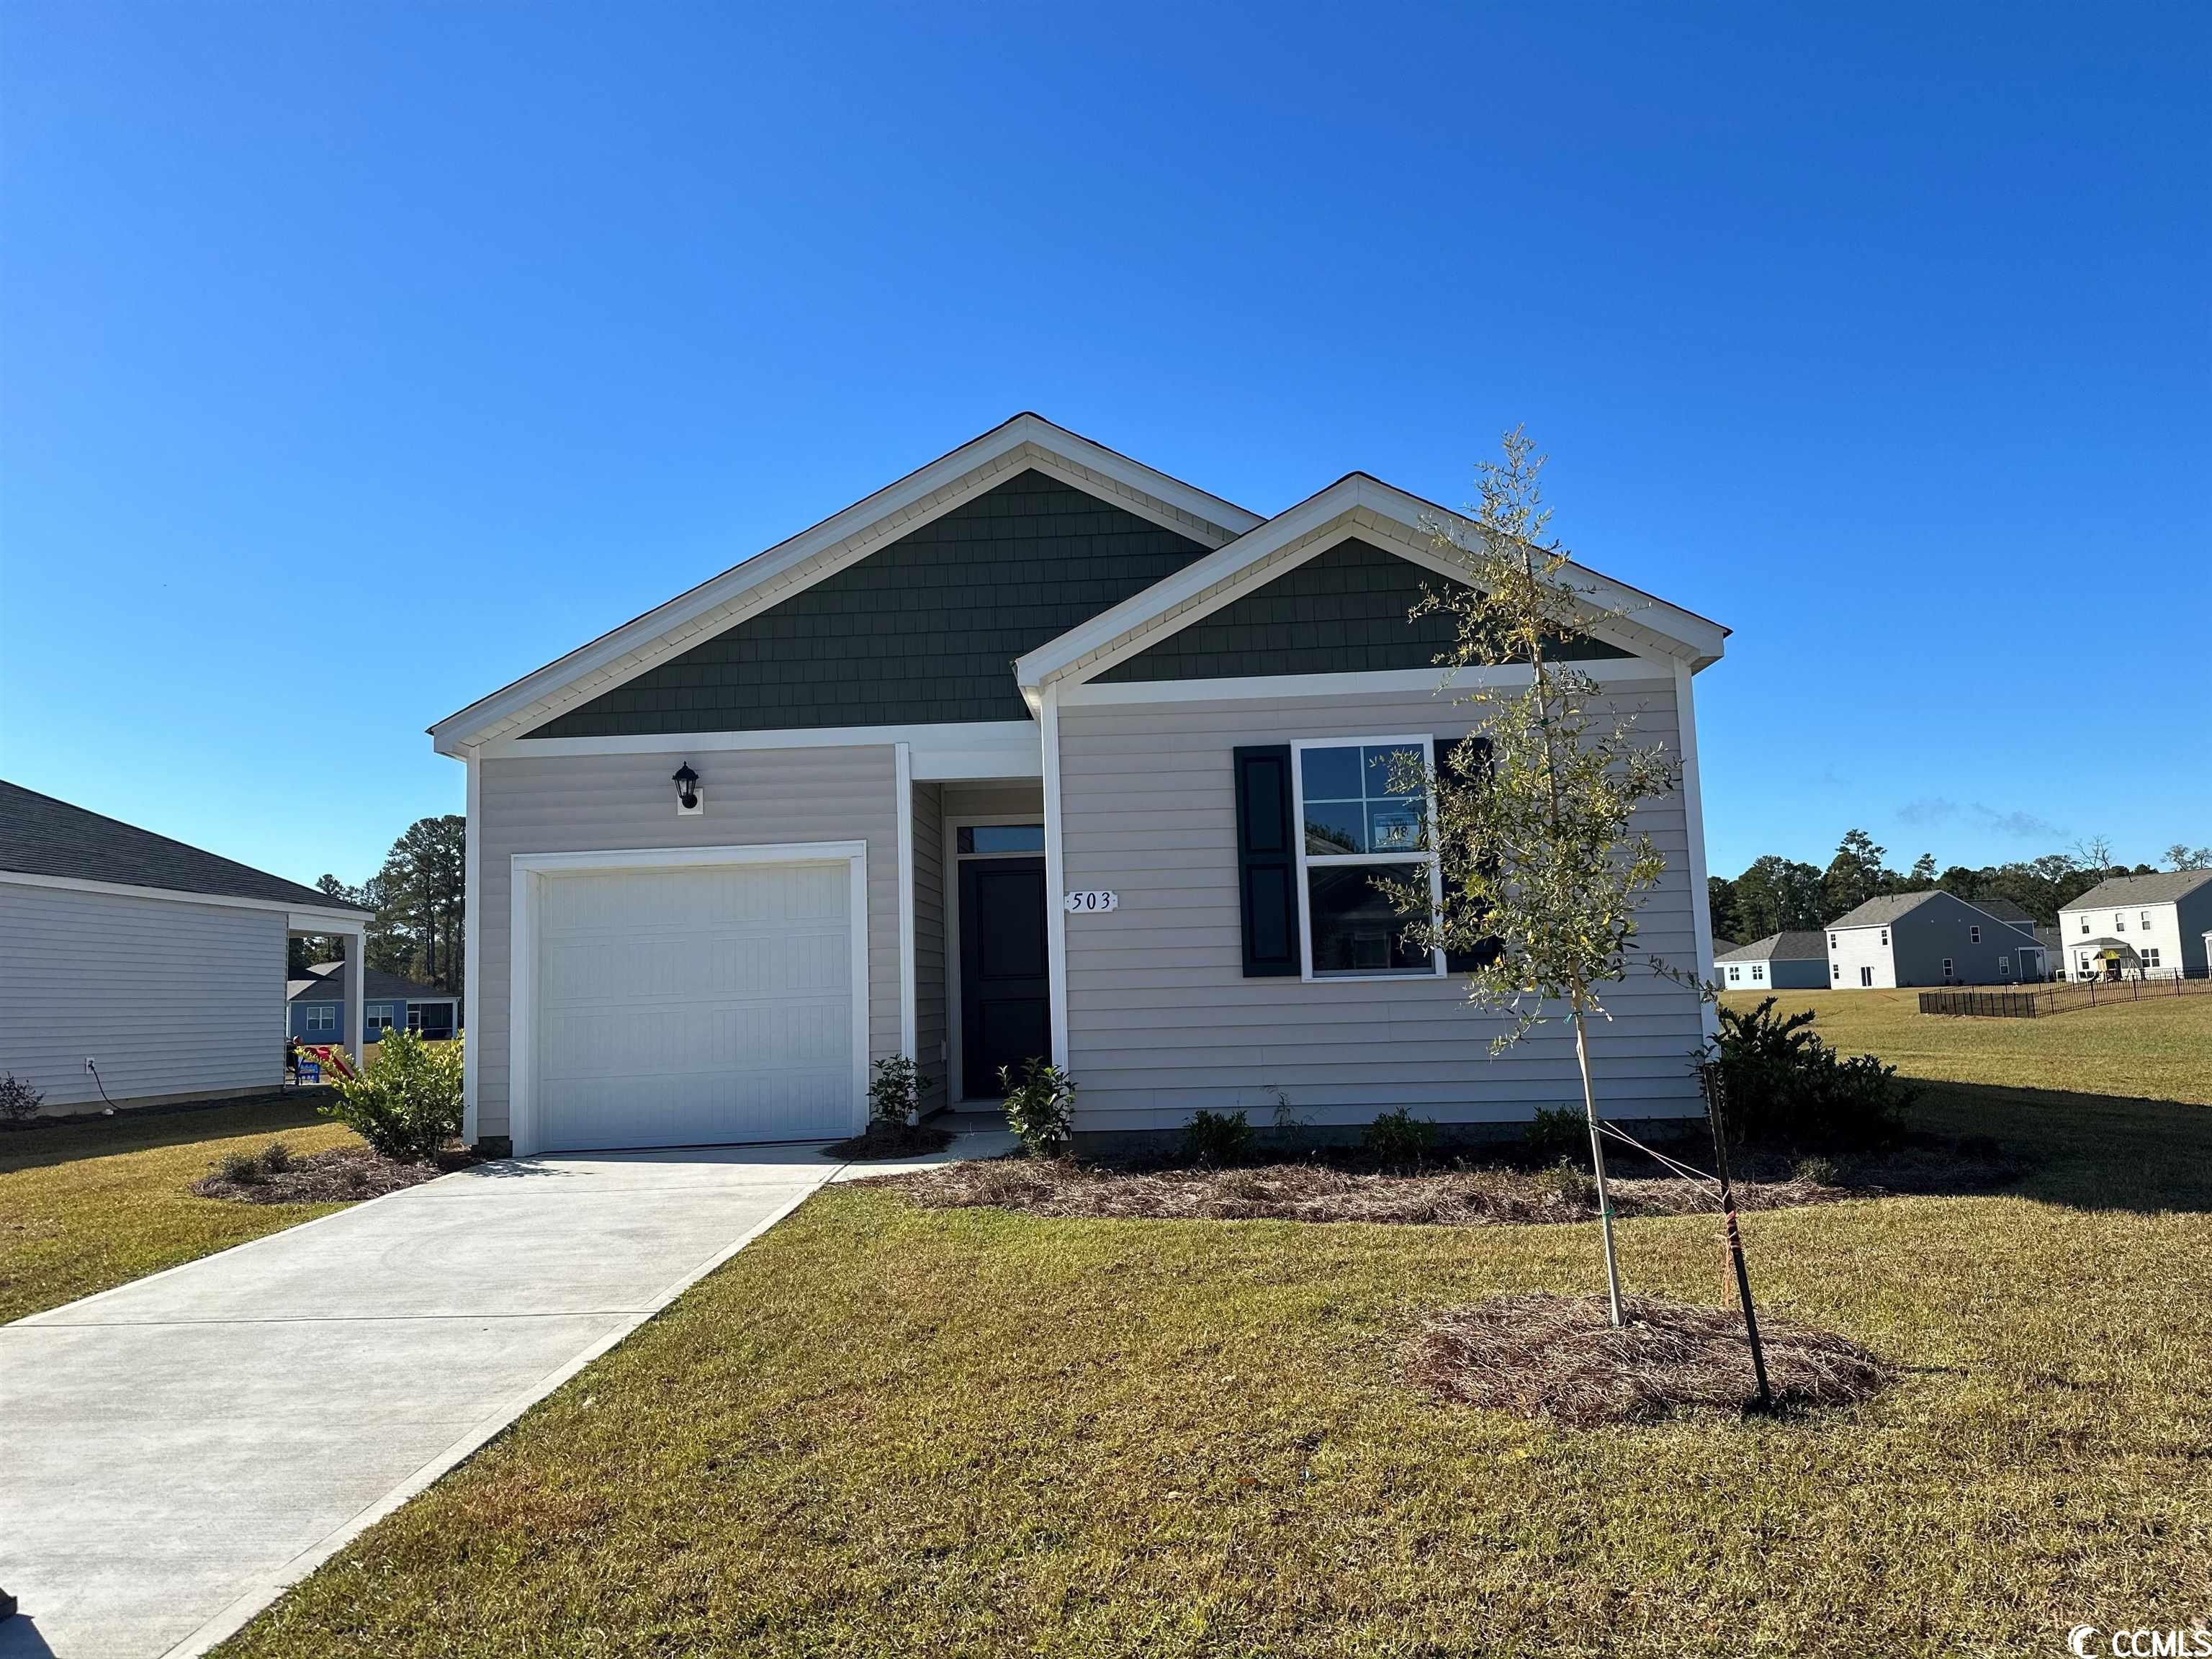 503 Royal Arch Dr. Conway, SC 29526